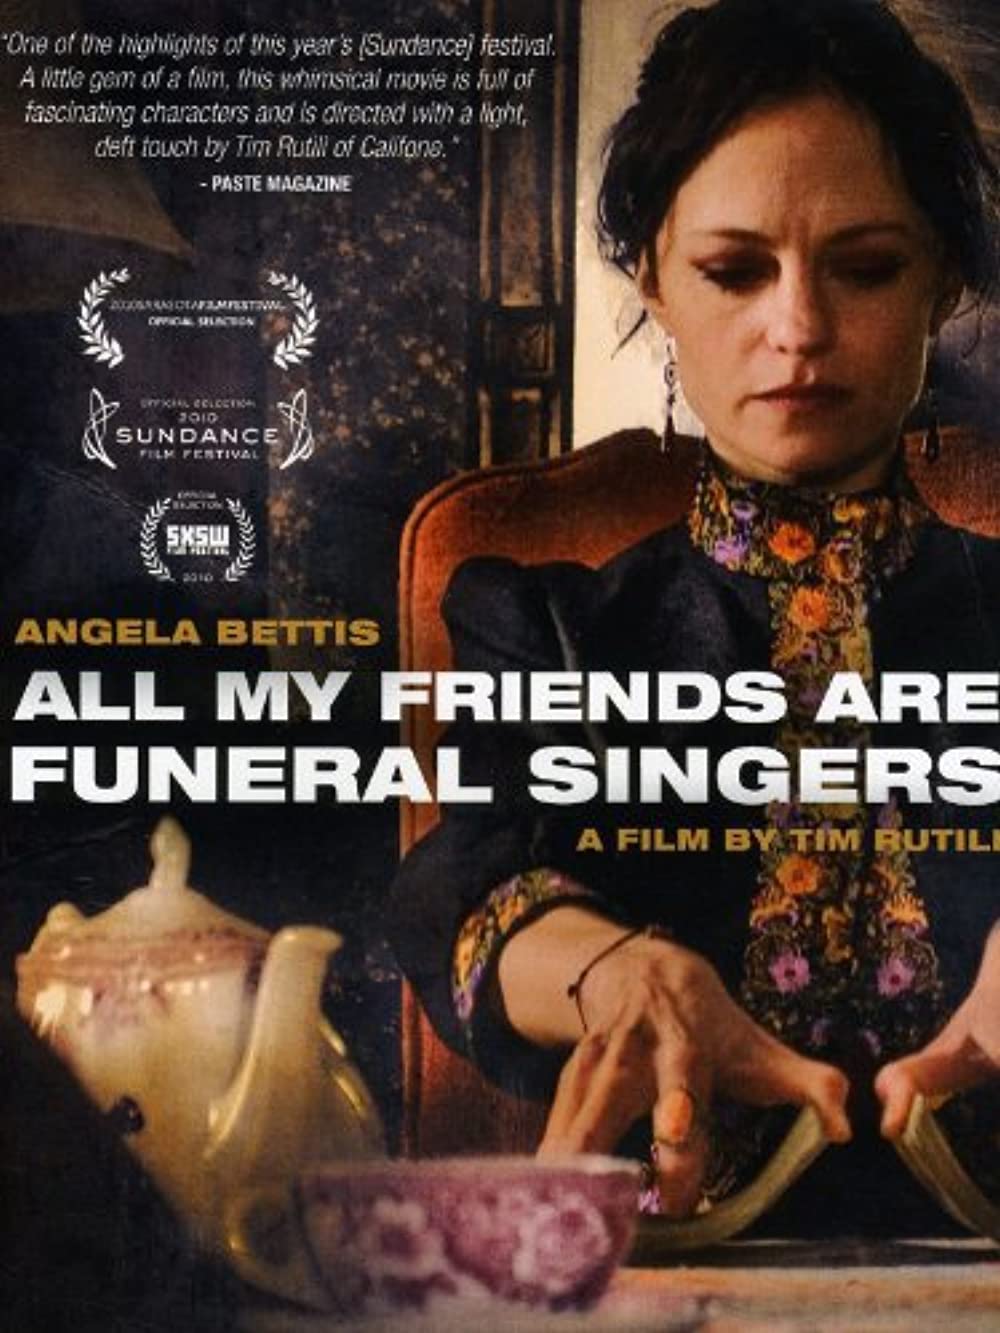 Download All My Friends Are Funeral Singers Movie | All My Friends Are Funeral Singers Movie Review